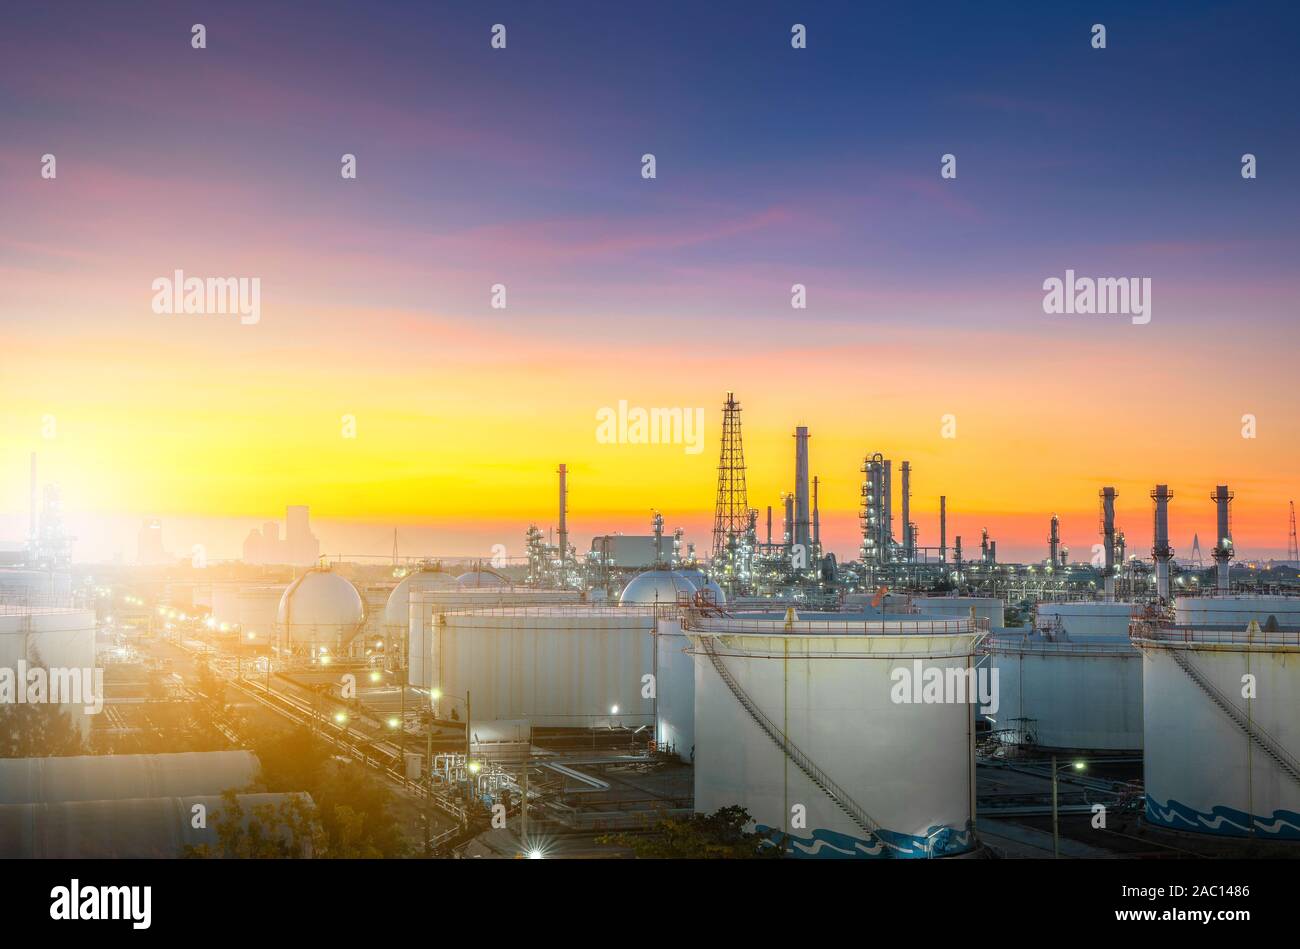 Large oil and gas refinery industrial area and beautiful lighting at Twilight. Stock Photo